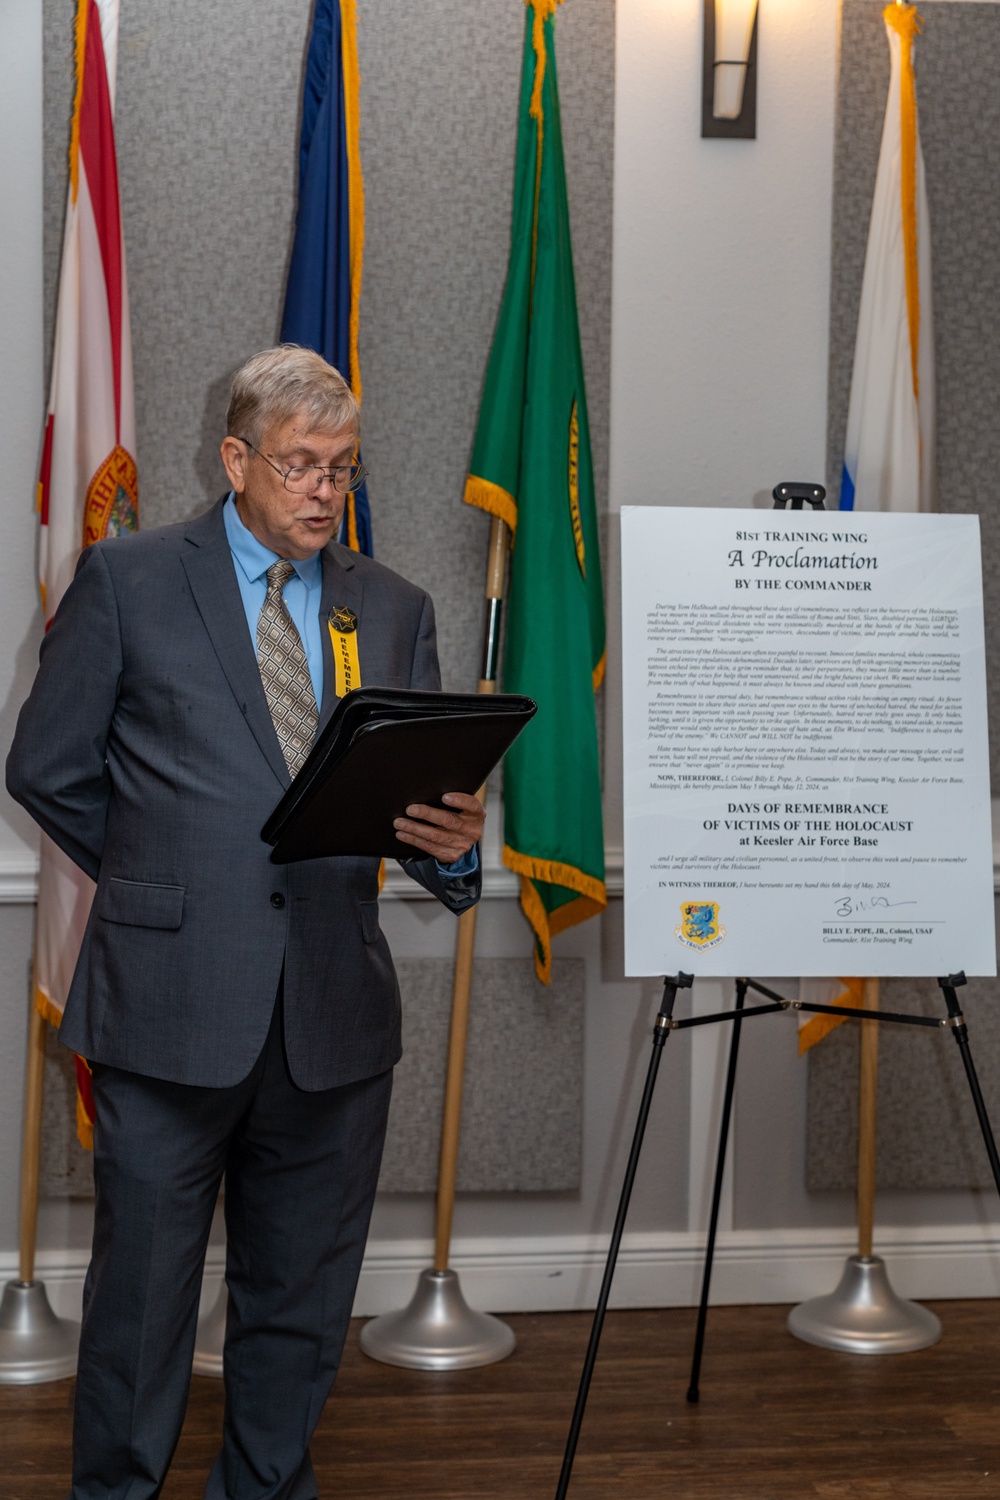 Days of Remembrance of Victims of the Holocaust Proclamation Signing